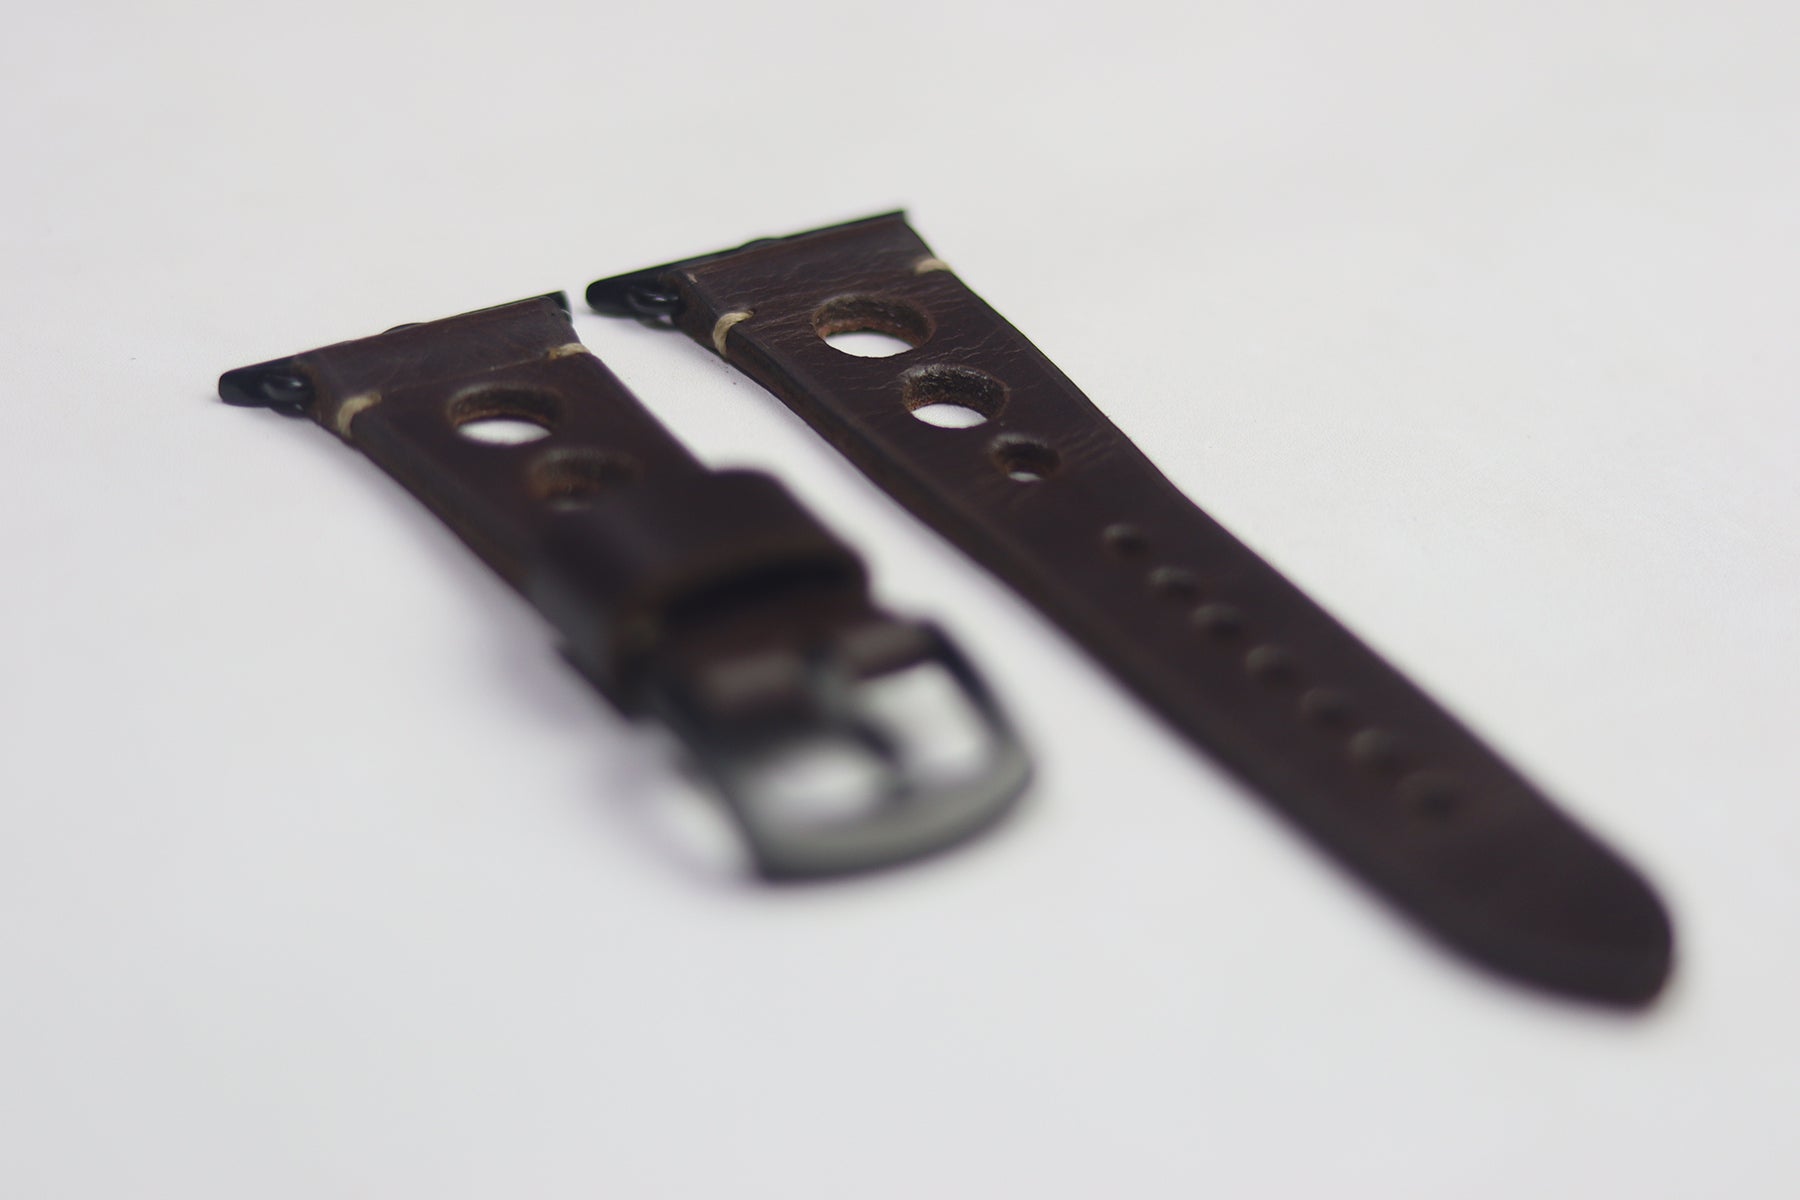 CHOCOLATE BROWN HAND-CRAFTED APPLE WATCH STRAPS